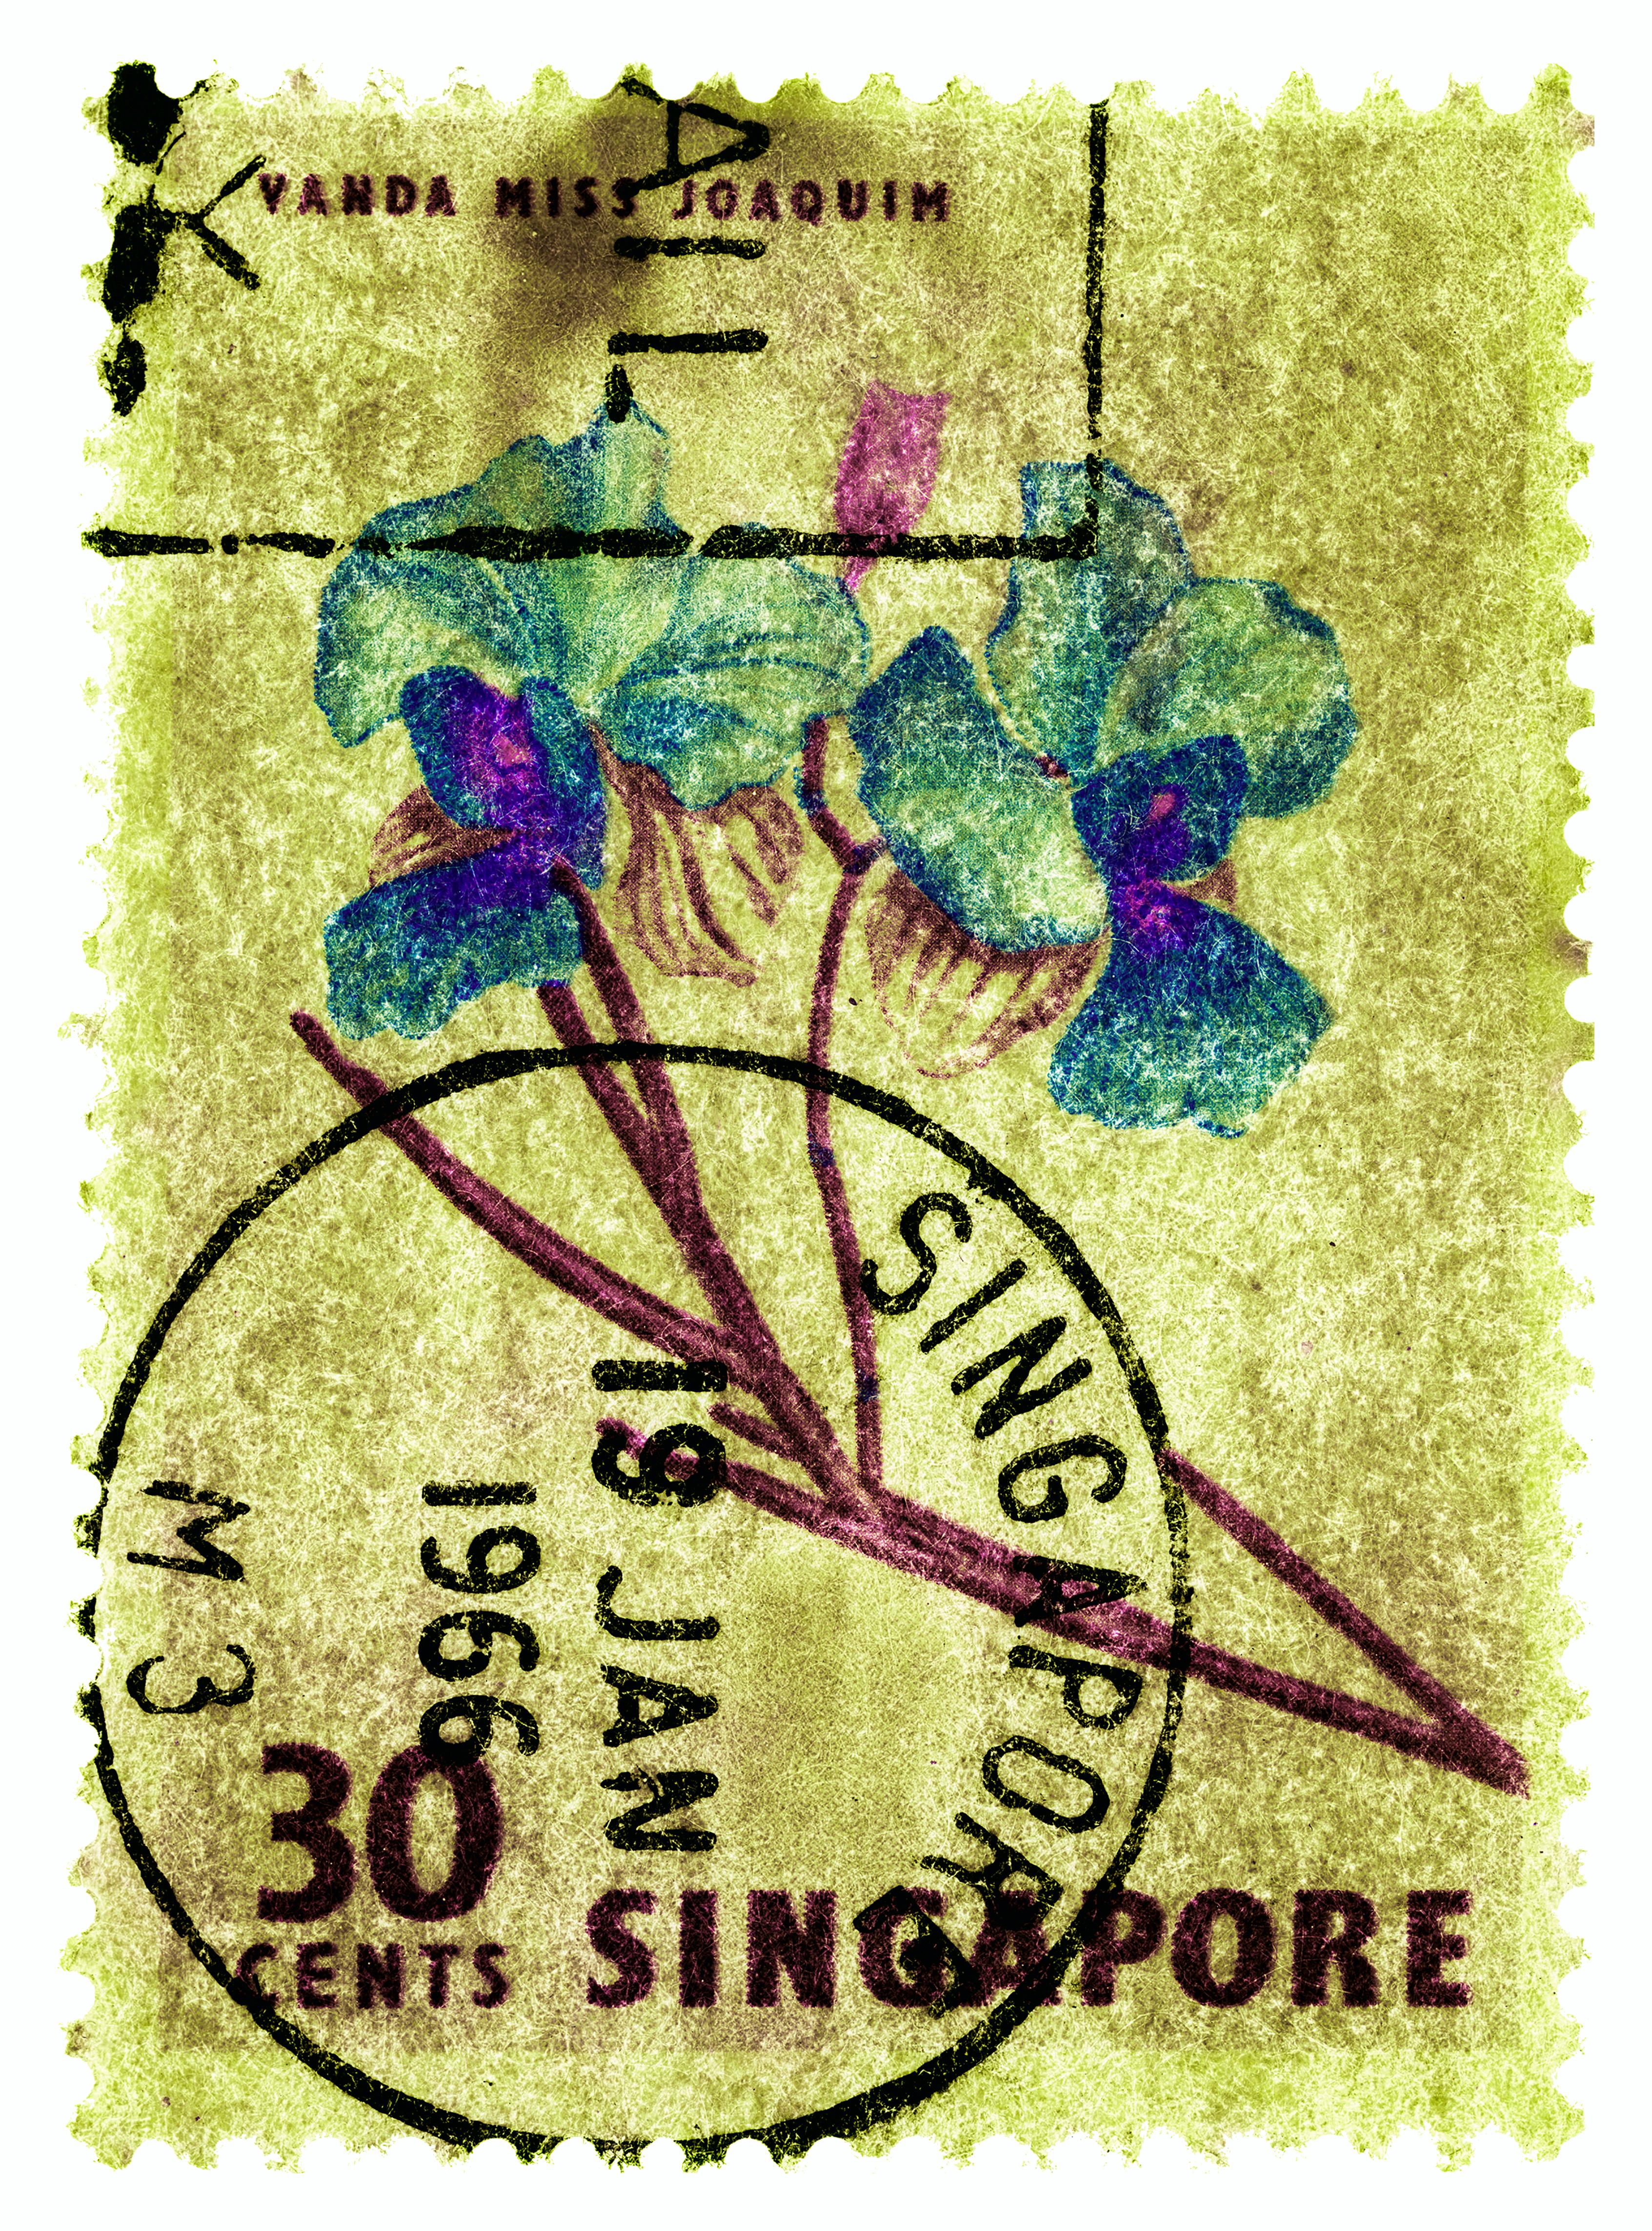 Heidler & Heeps Print - Singapore Stamp Collection, 30c Singapore Orchid Yellow - Floral color photo